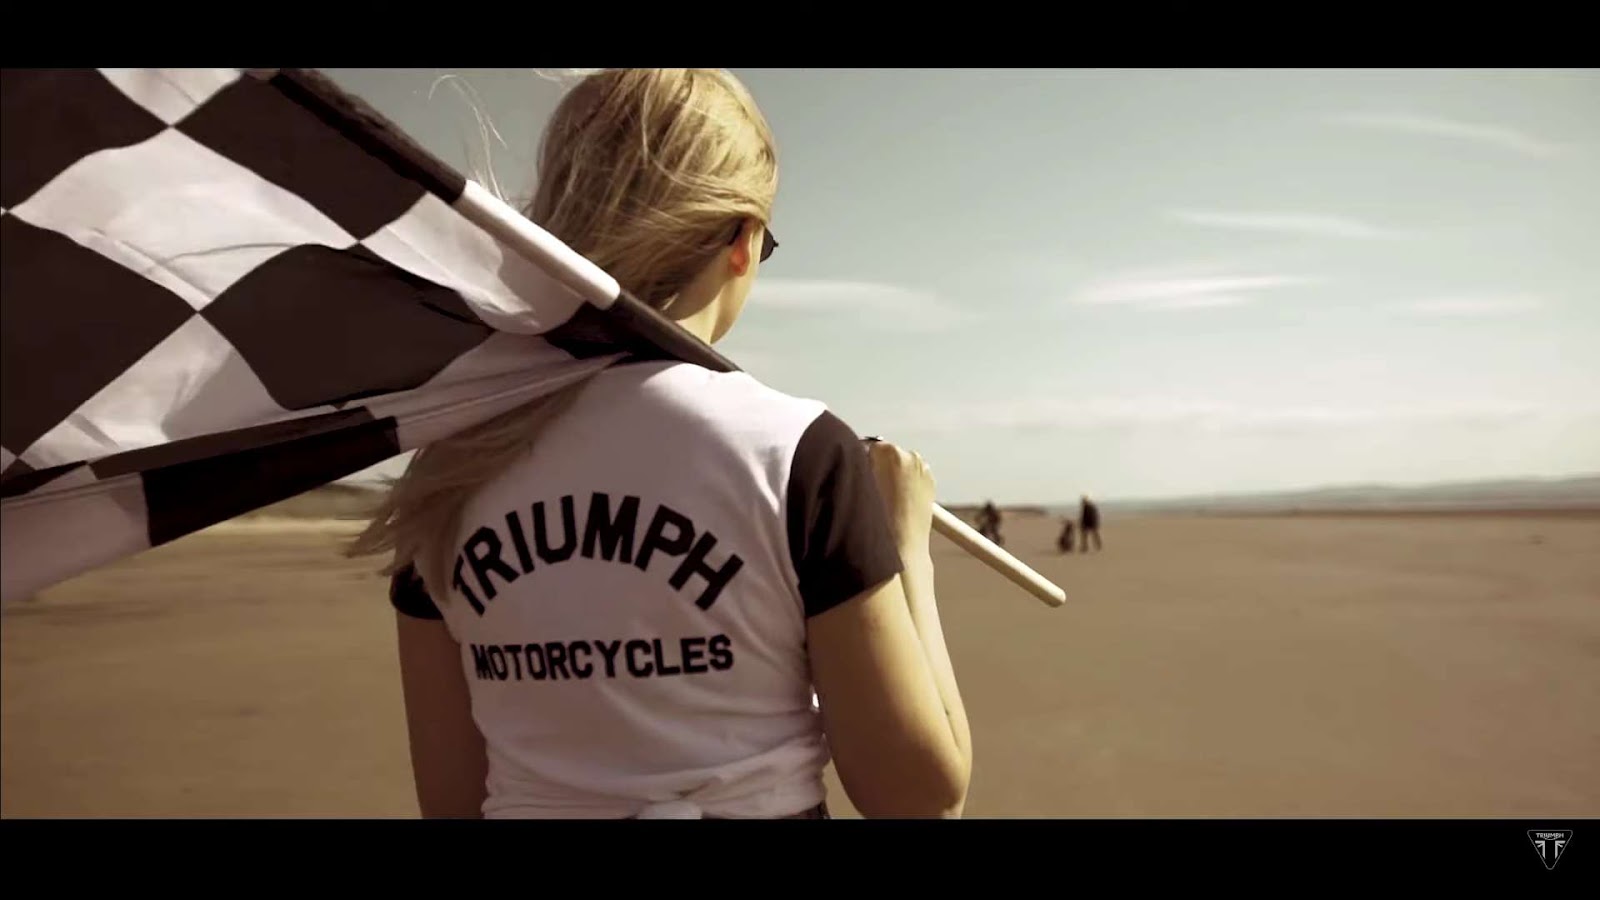 Close up of woman in triumph motorcycle T-shirt